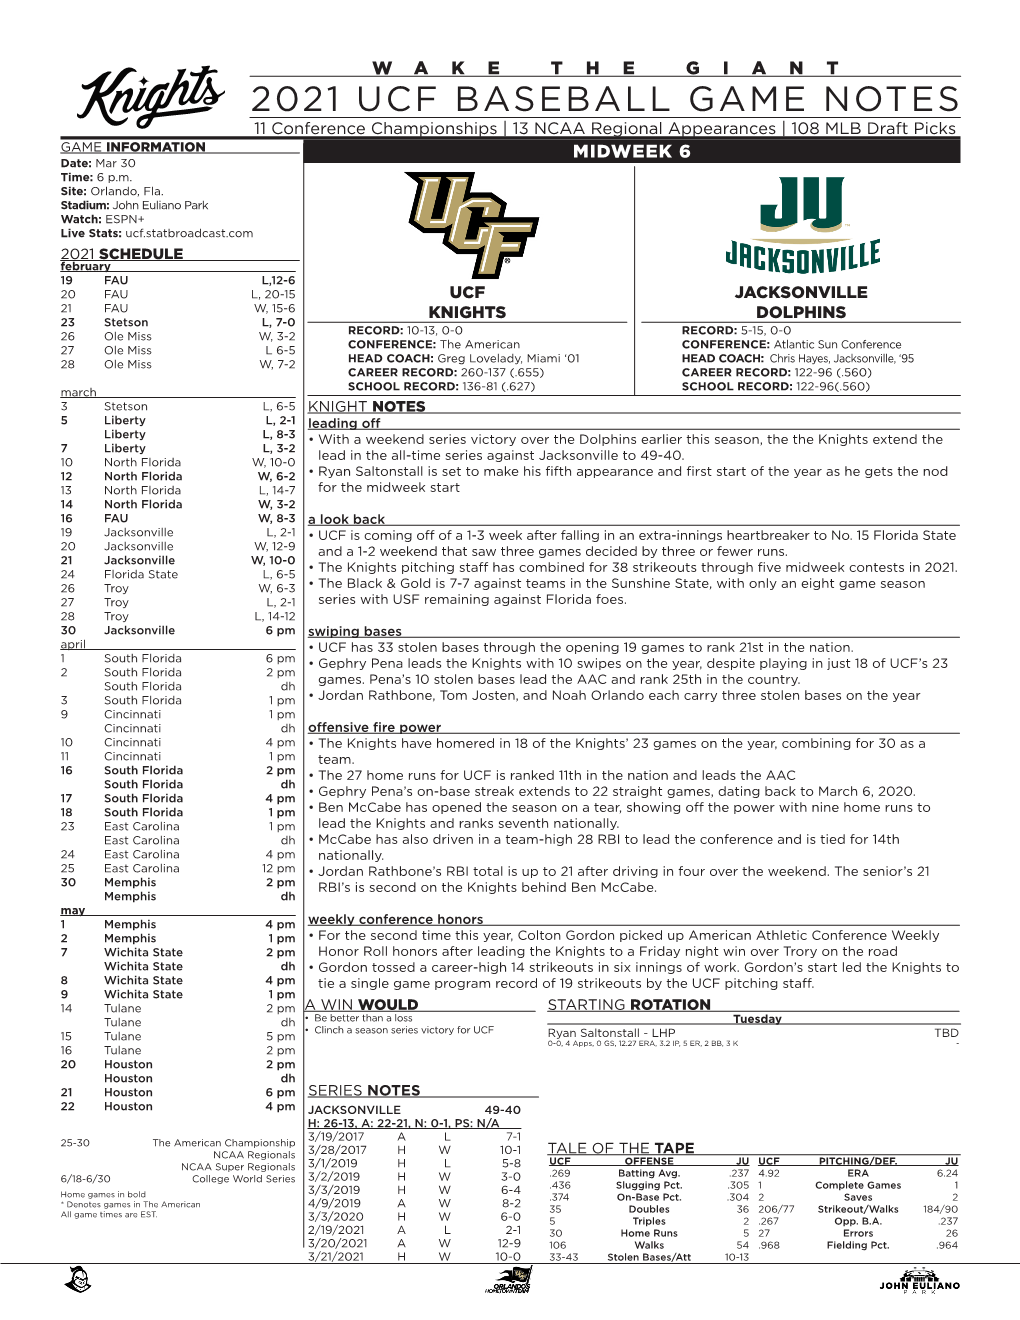 2021 UCF BASEBALL GAME NOTES 11 Conference Championships | 13 NCAA Regional Appearances | 108 MLB Draft Picks GAME INFORMATION MIDWEEK 6 Date: Mar 30 Time: 6 P.M